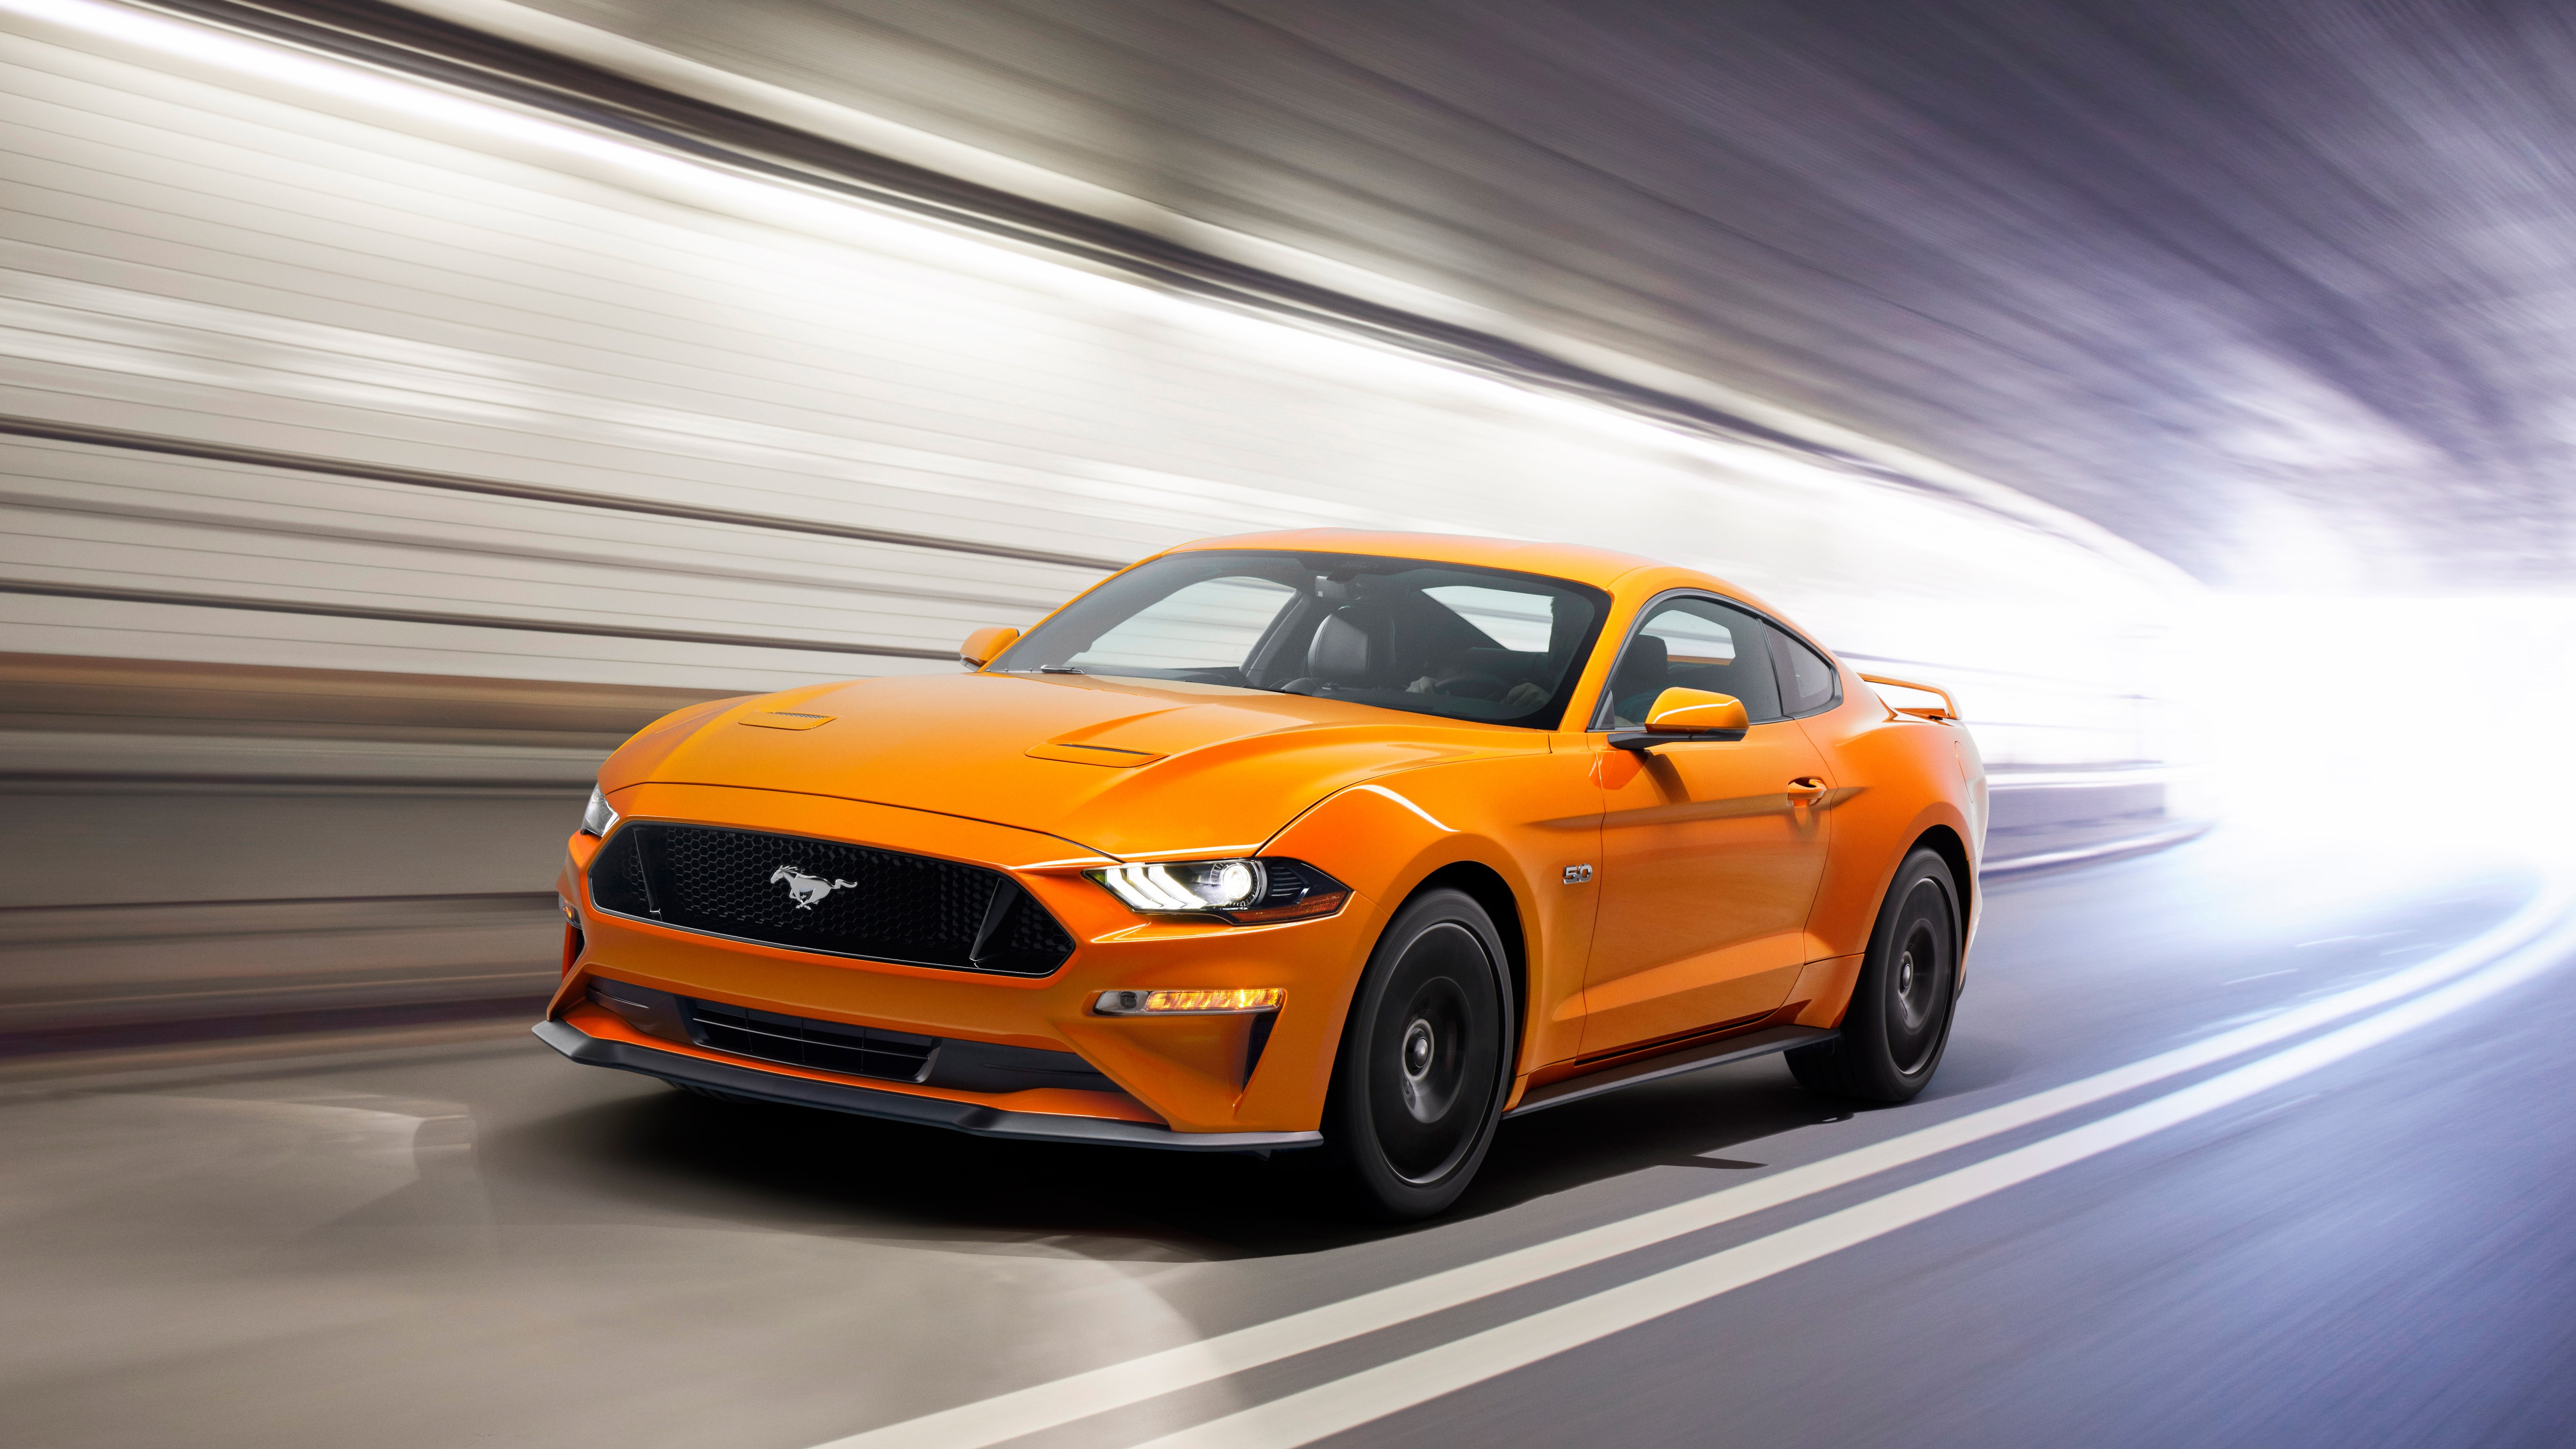 General 5120x2880 car Ford Mustang orange cars vehicle tunnel Ford headlights blurred blurry background driving frontal view muscle cars American cars